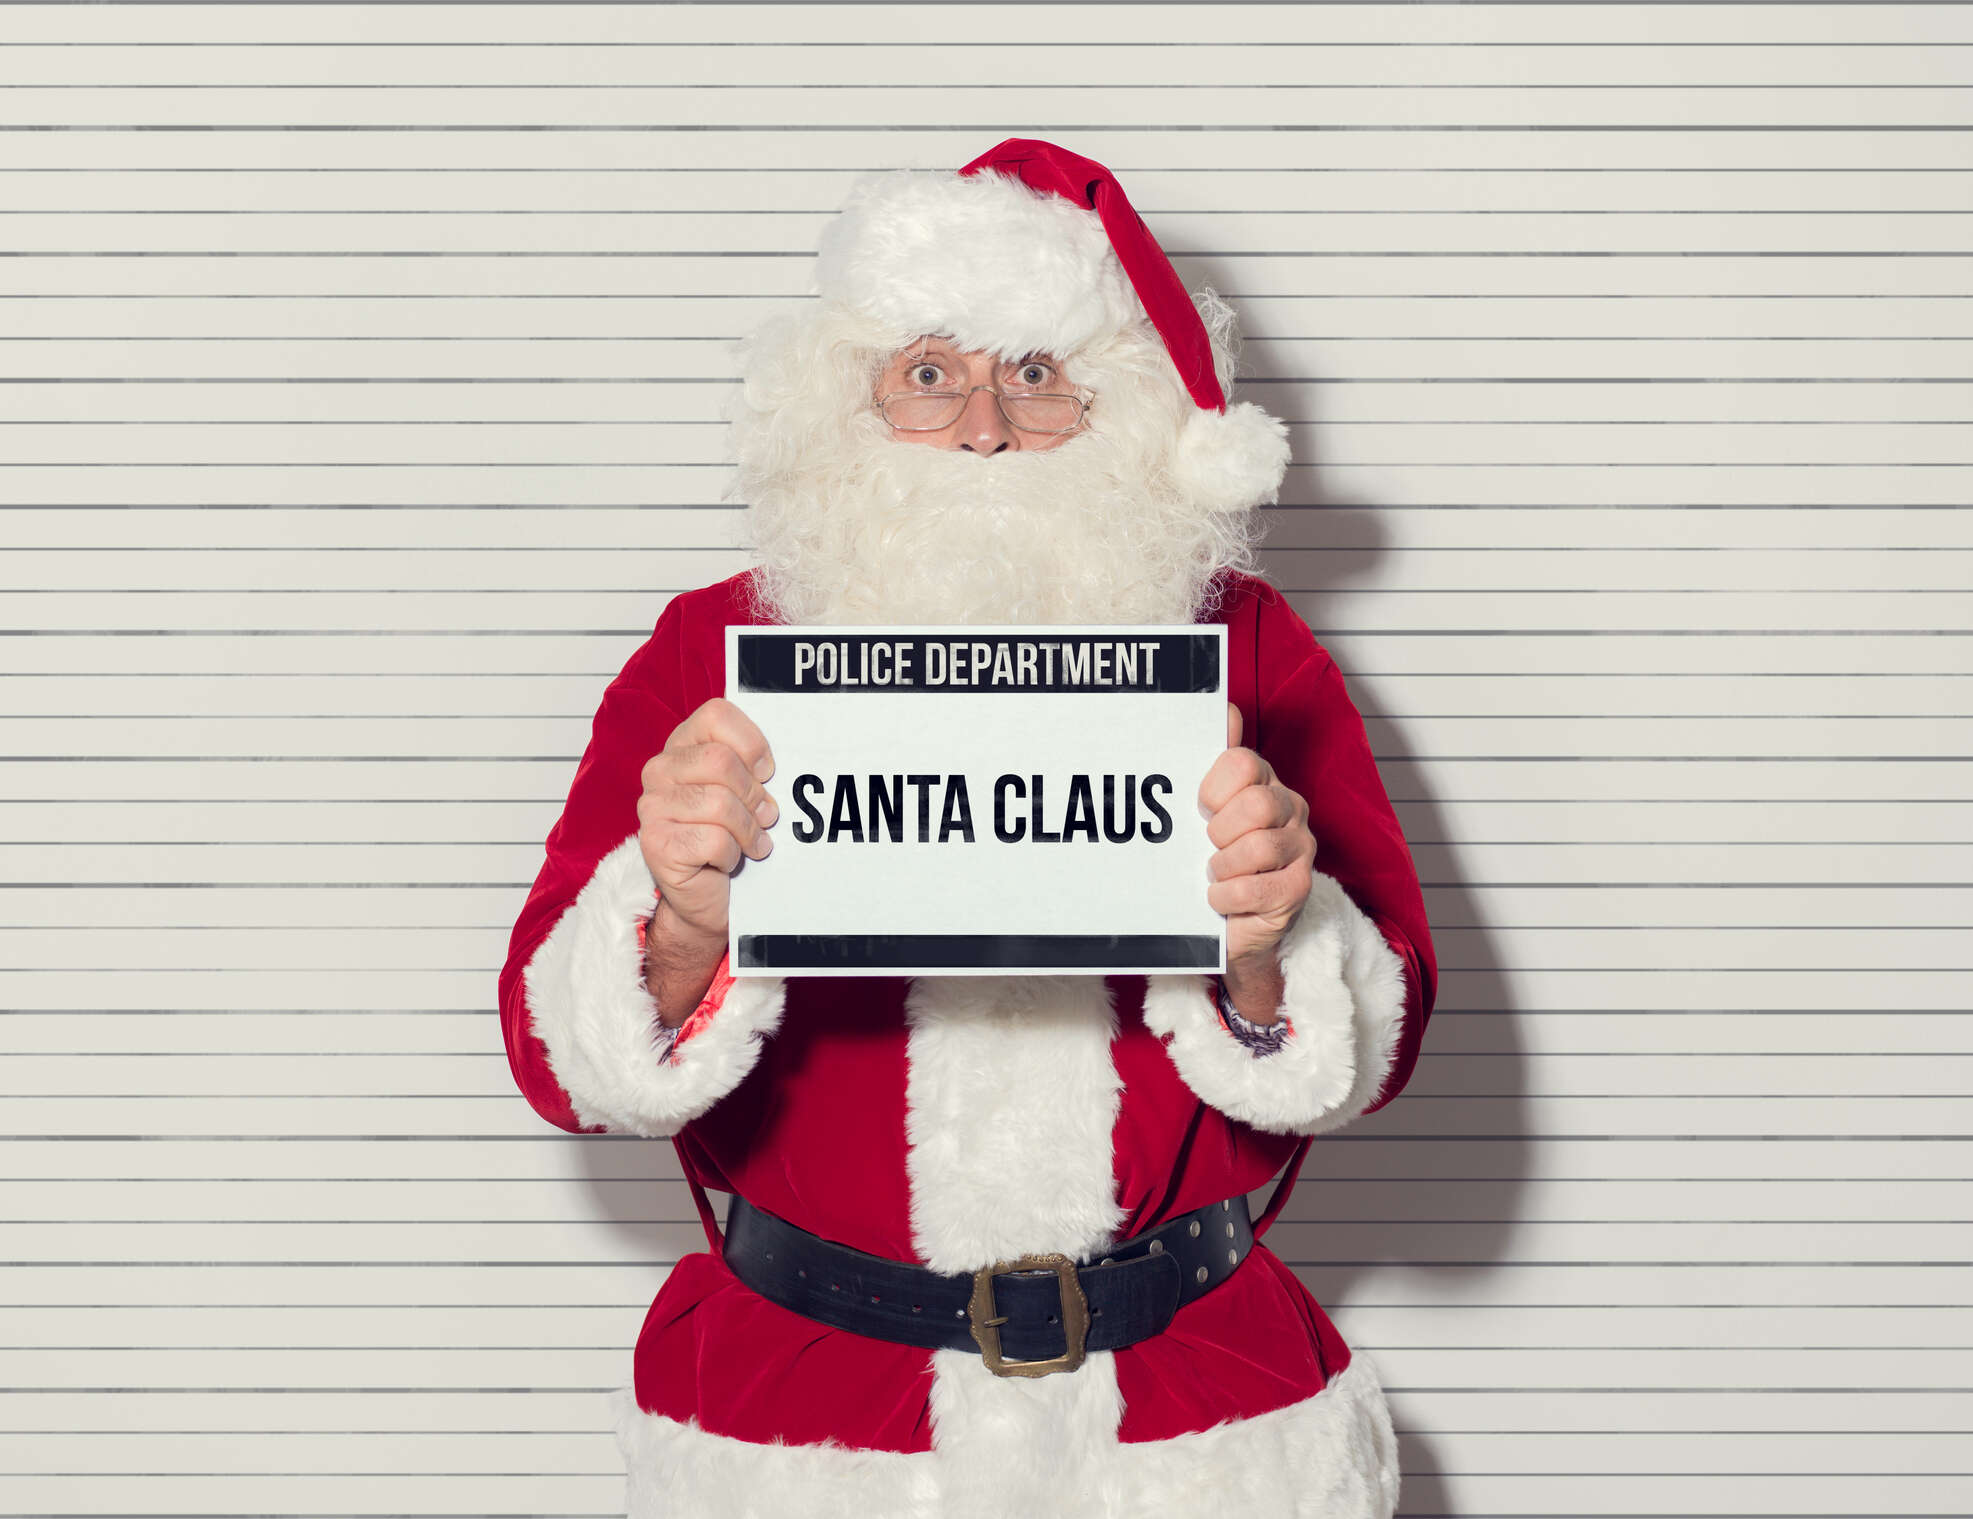 Santa Claus arrested on Christmas eve, he is posing for his mug shot at the police department and holding an identification board